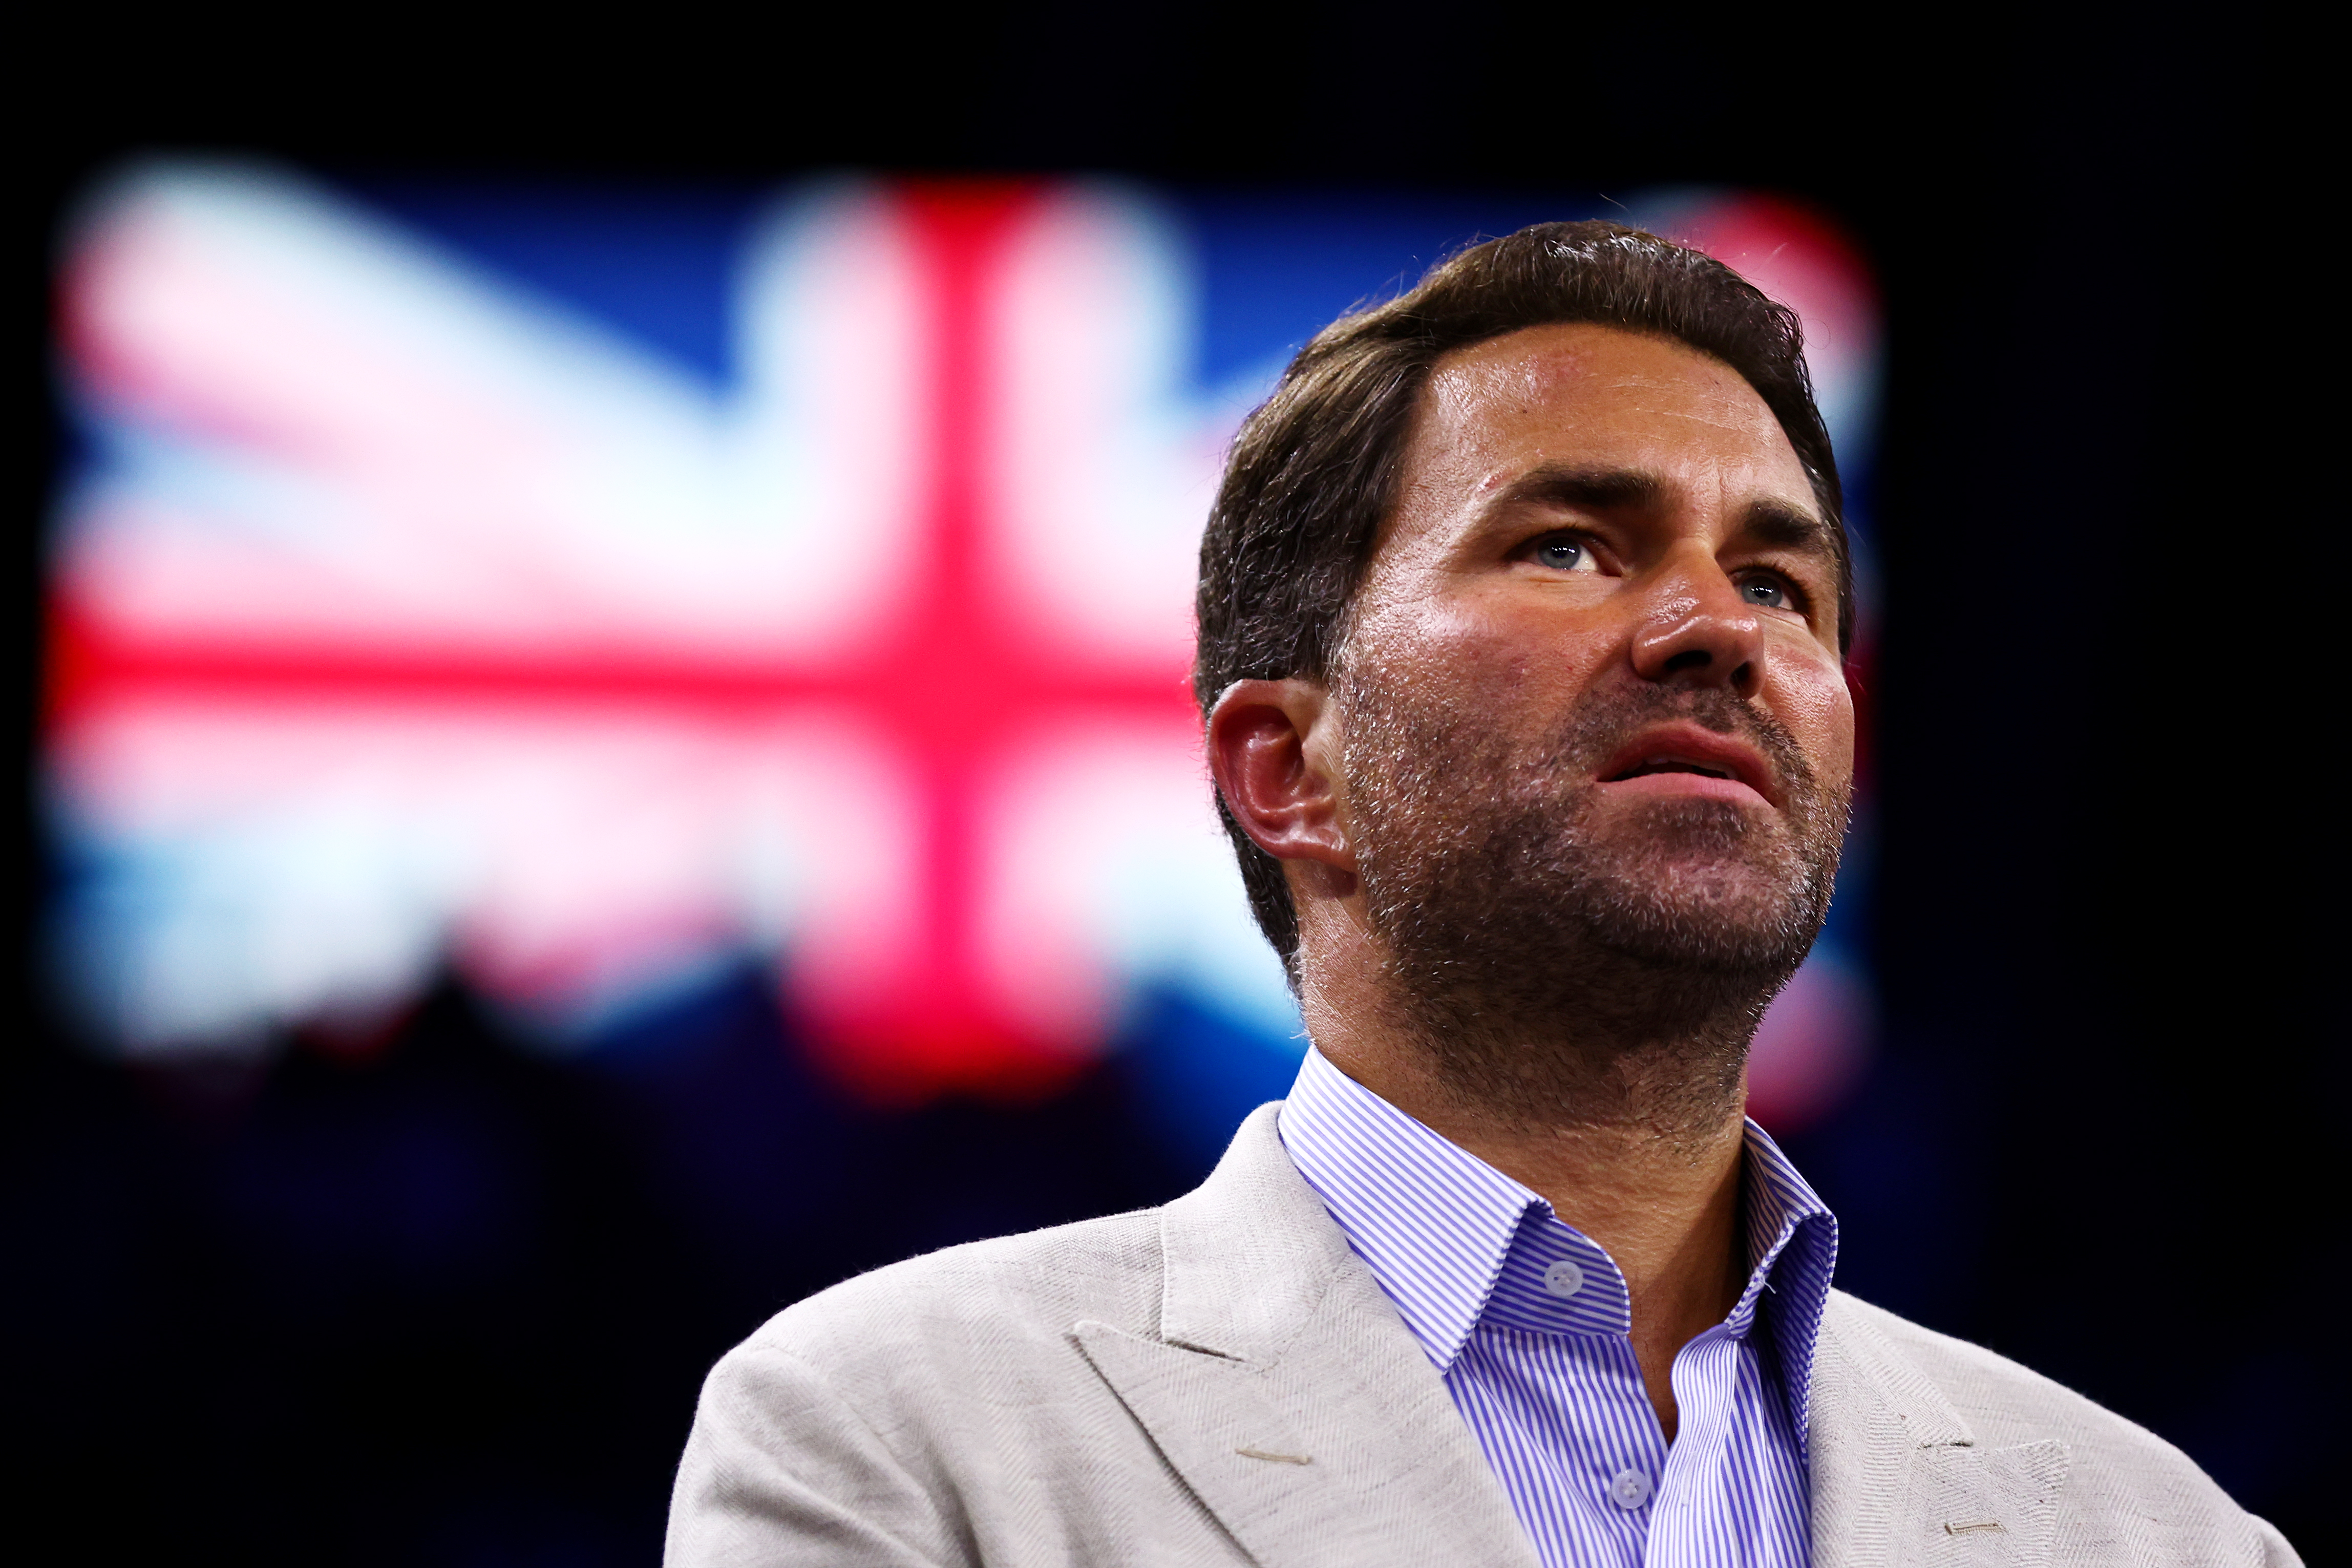 Eddie Hearn says Chris Eubank Jr vs Conor Benn will go forward as scheduled before sharing thoughts on this weekend’s third meeting between Canelo Alvarez and Gennadiy Golovkin.